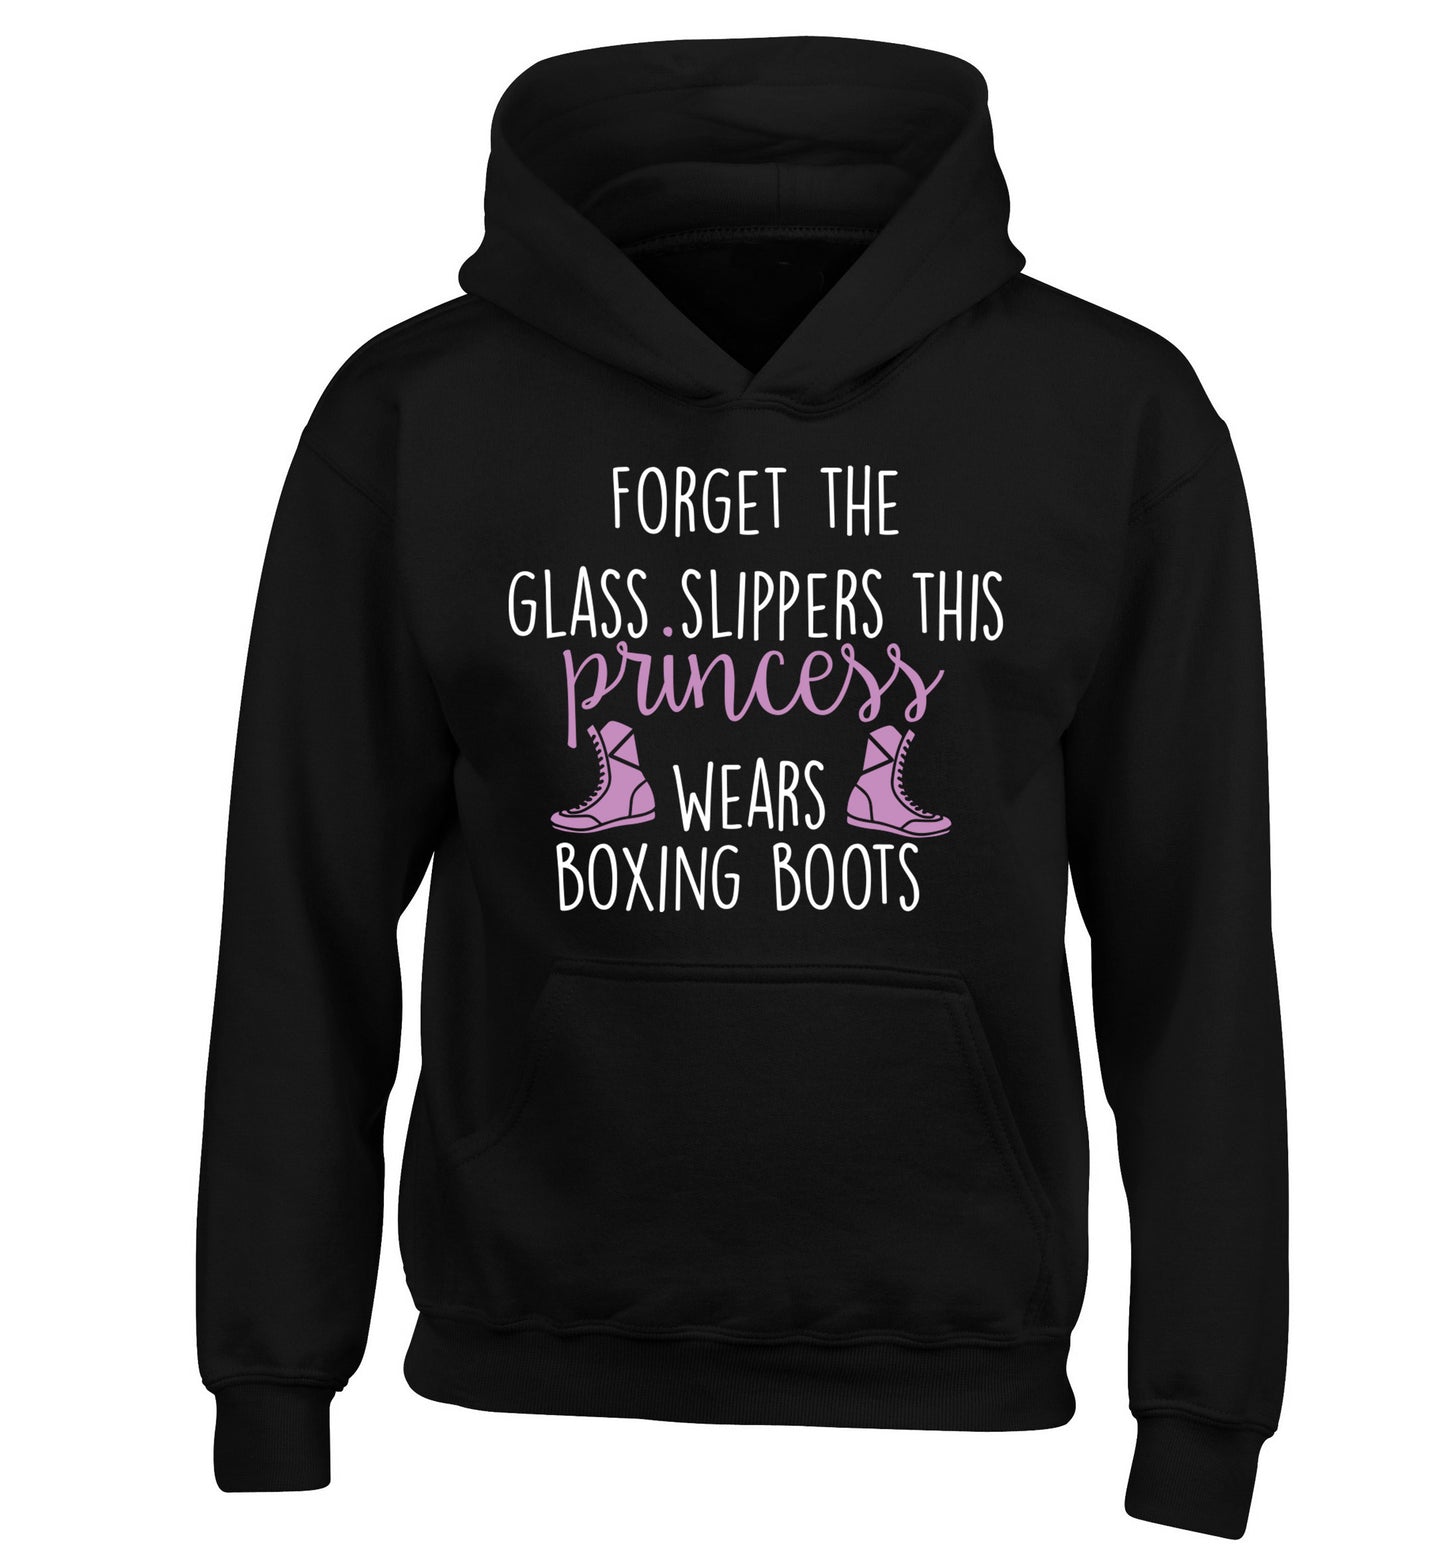 Forget the glass slippers this princess wears boxing boots children's black hoodie 12-14 Years